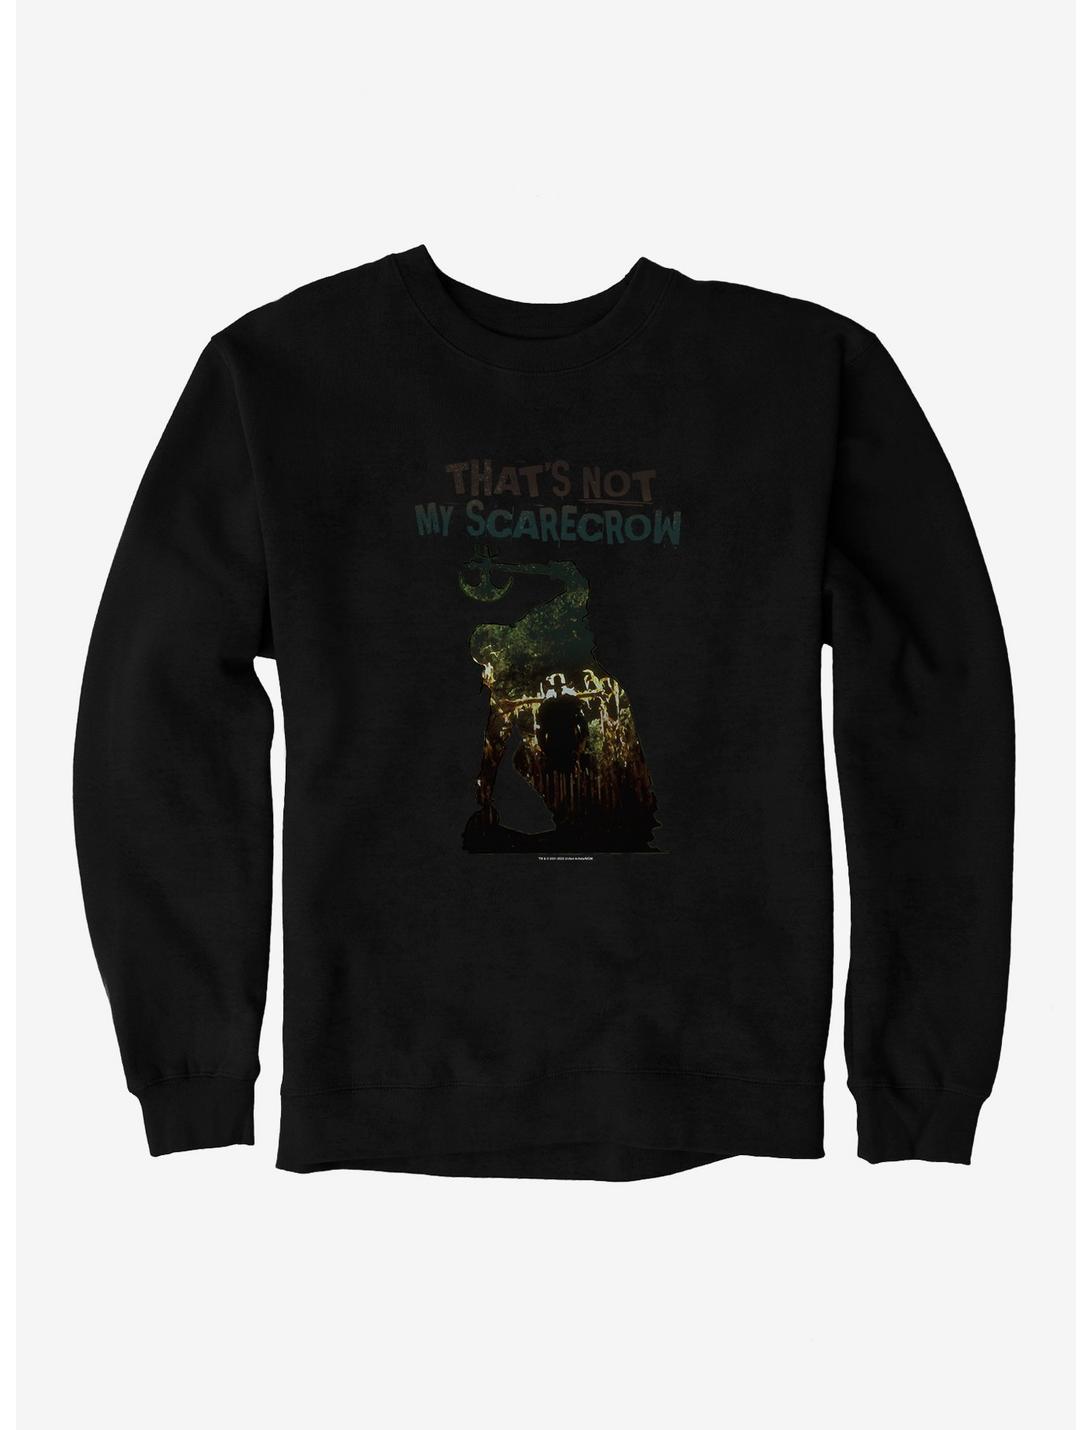 Jeepers Creepers Not My Scarecrow Sweatshirt, BLACK, hi-res